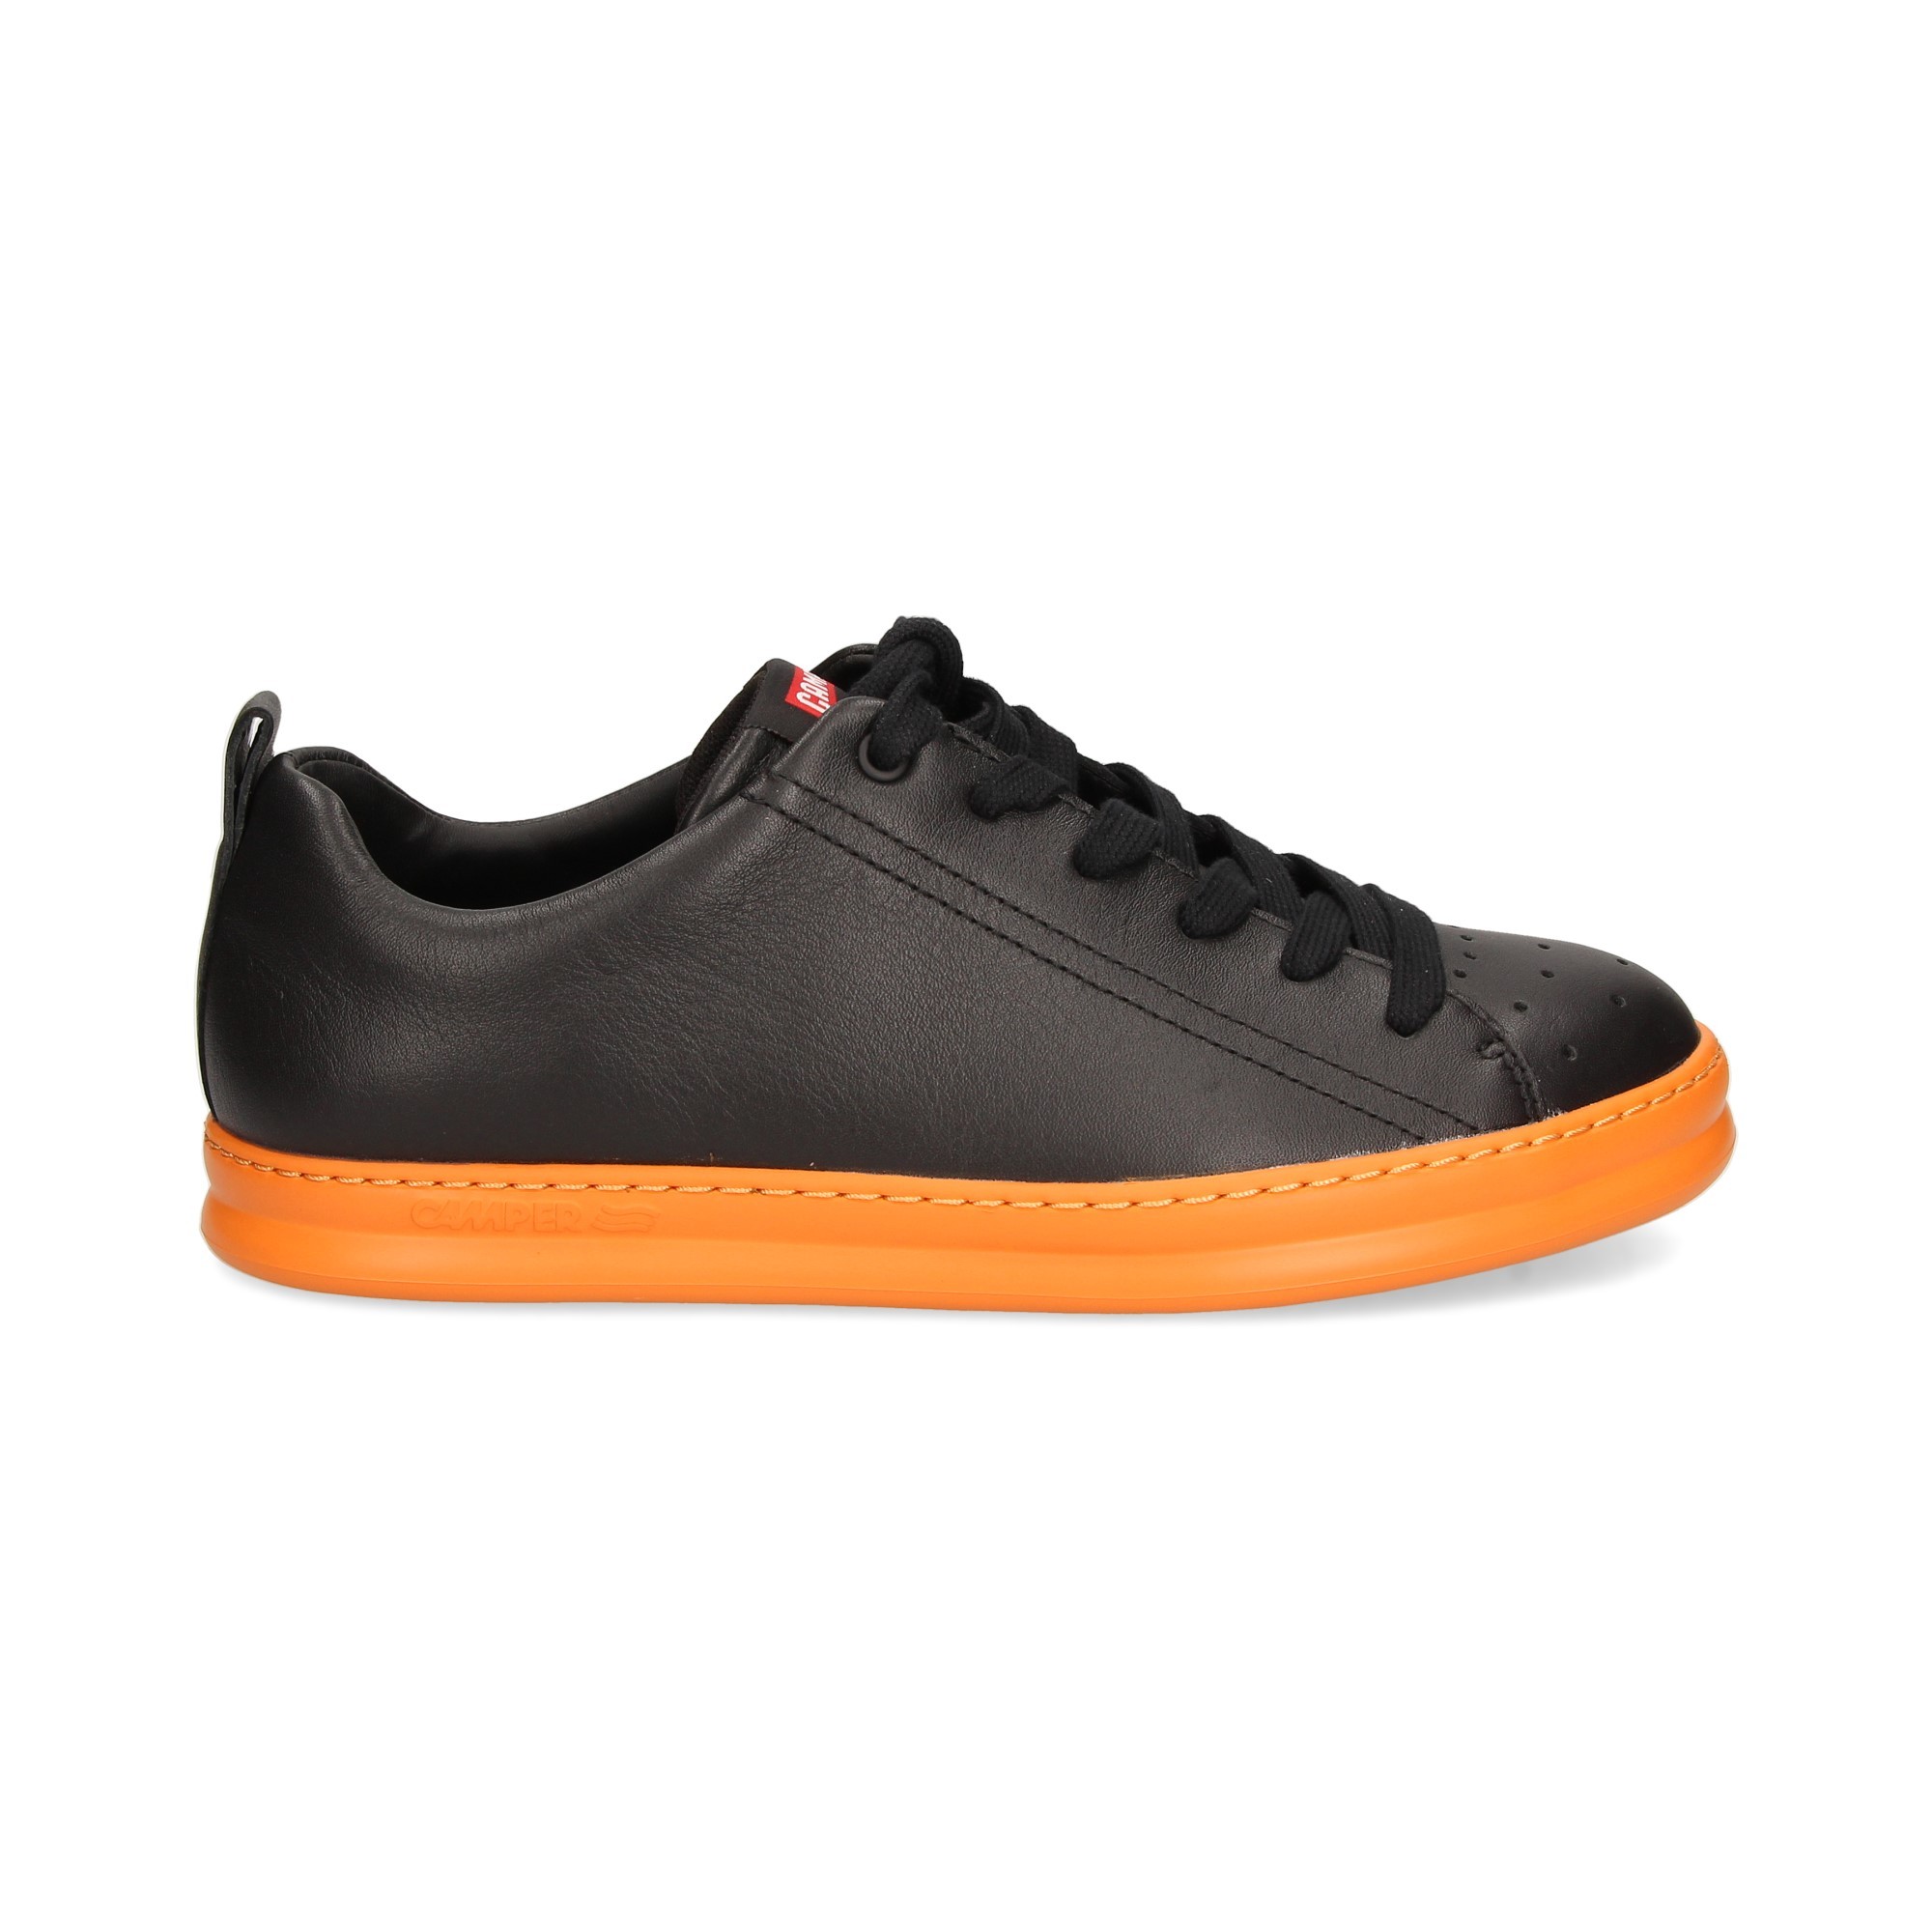 sporty-sole-waves-black-leather